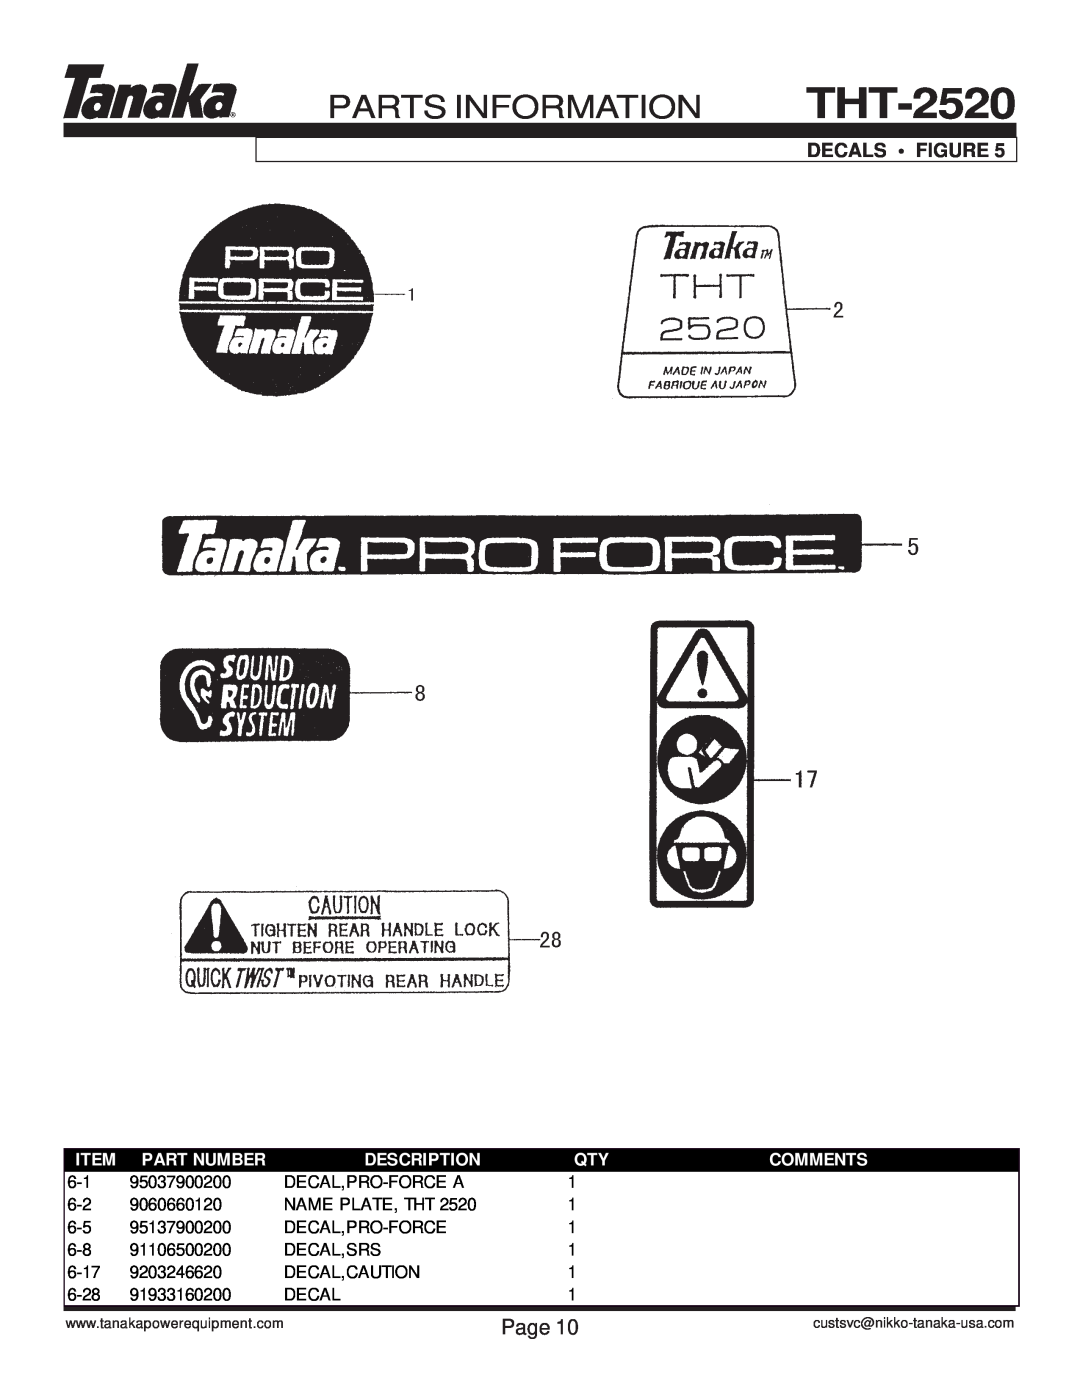 Tanaka THT-2520 manual Parts Information, Decals Figure, Page, Part Number, Description, Comments 